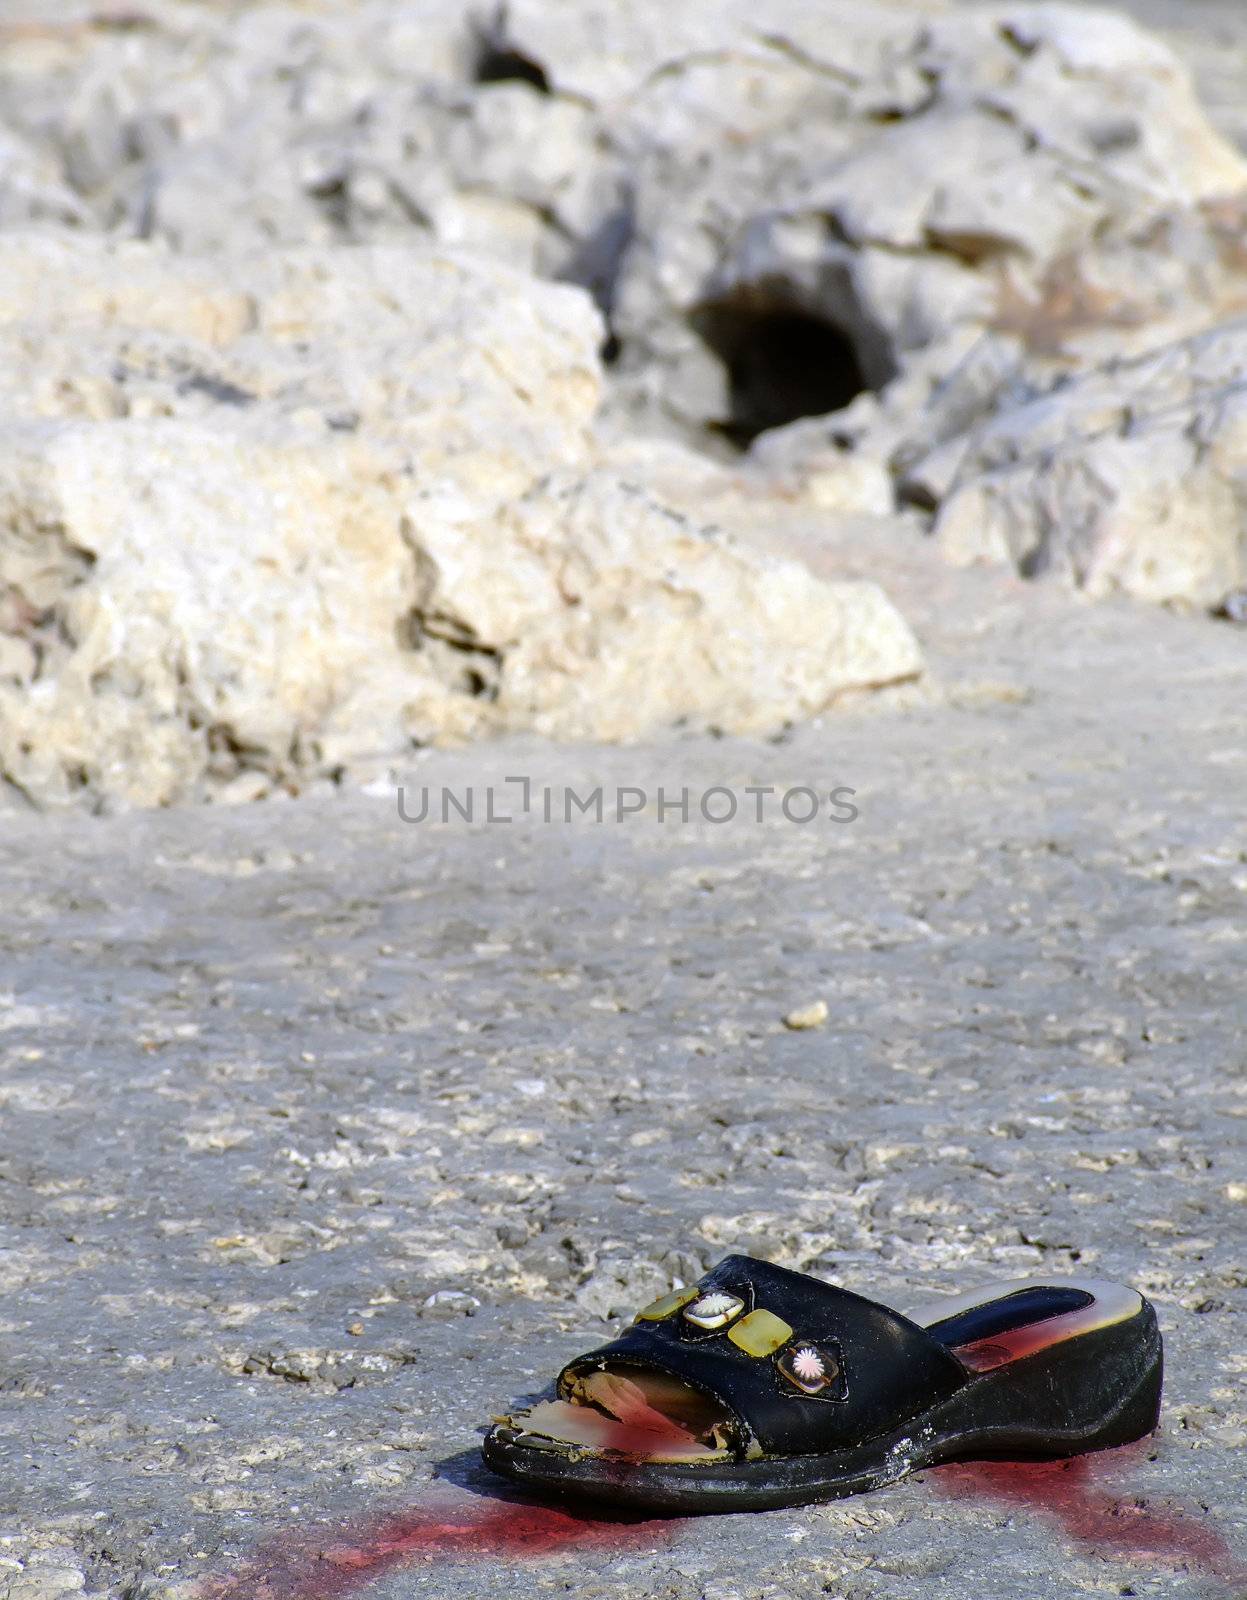 Lone battered shoe belonging to a warzone victim